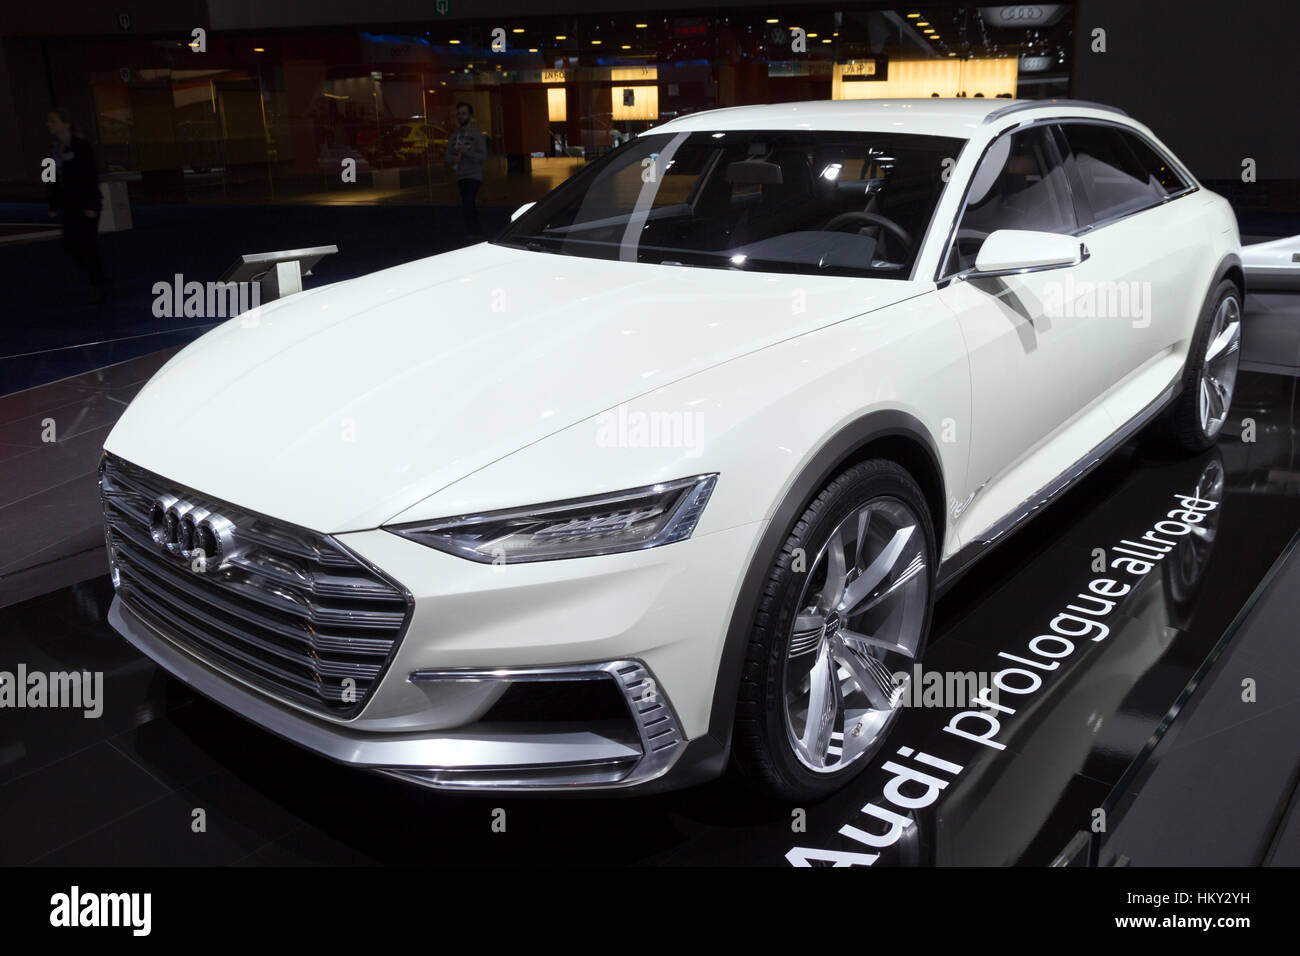 BRUSSELS - JAN 12, 2016: Audi Prologue Allroad on display at the Brussels Motor Show. Stock Photo